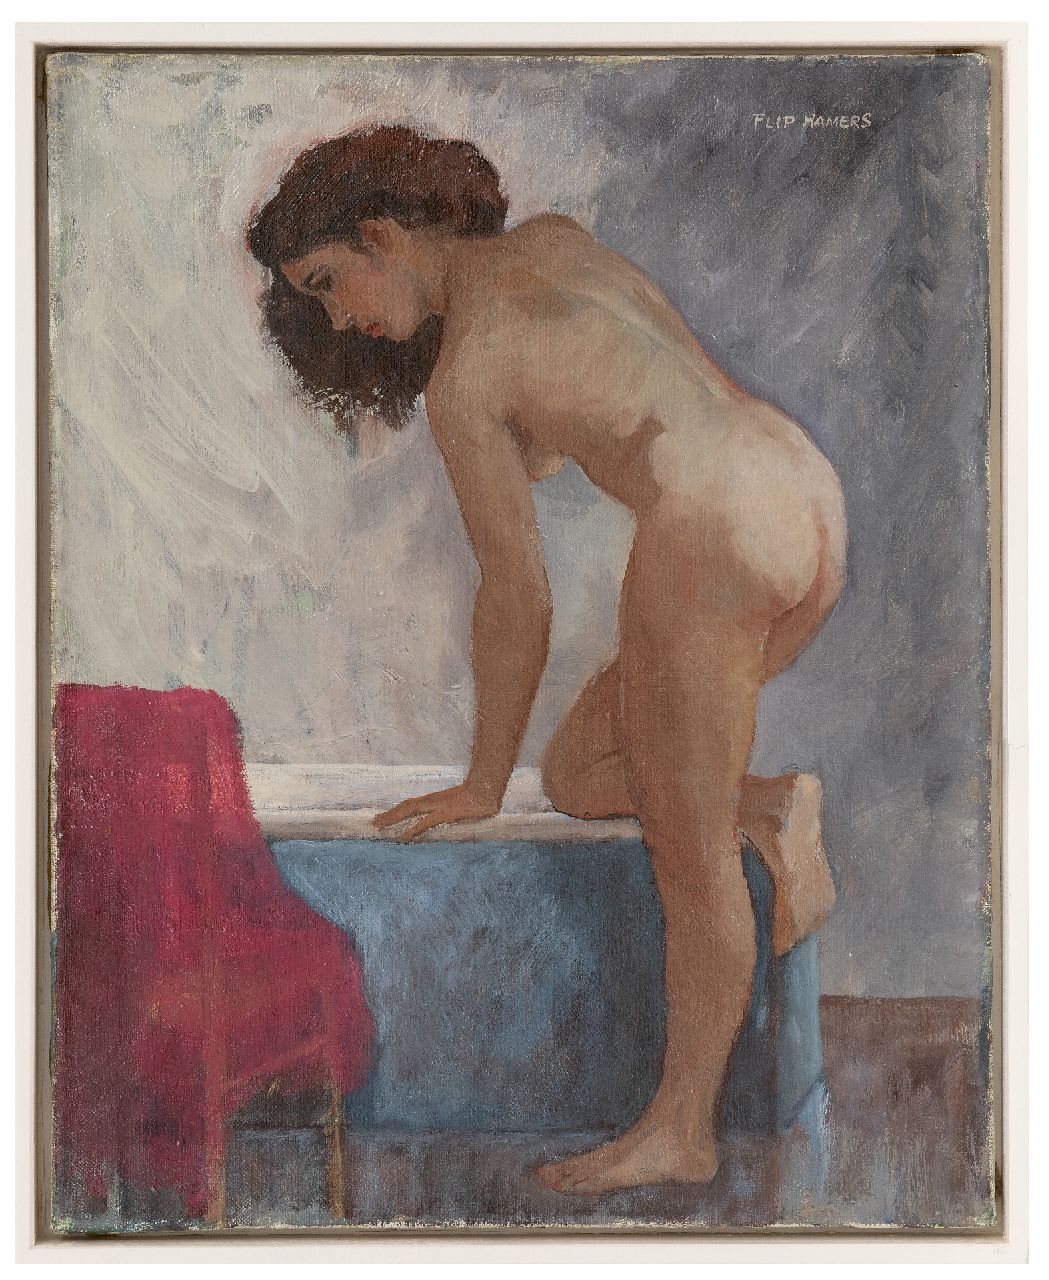 Hamers P.J.  | Philippus Jacob 'Flip' Hamers | Paintings offered for sale | Standing nude, oil on canvas 50.2 x 40.2 cm, signed u.r. and on the stretcher